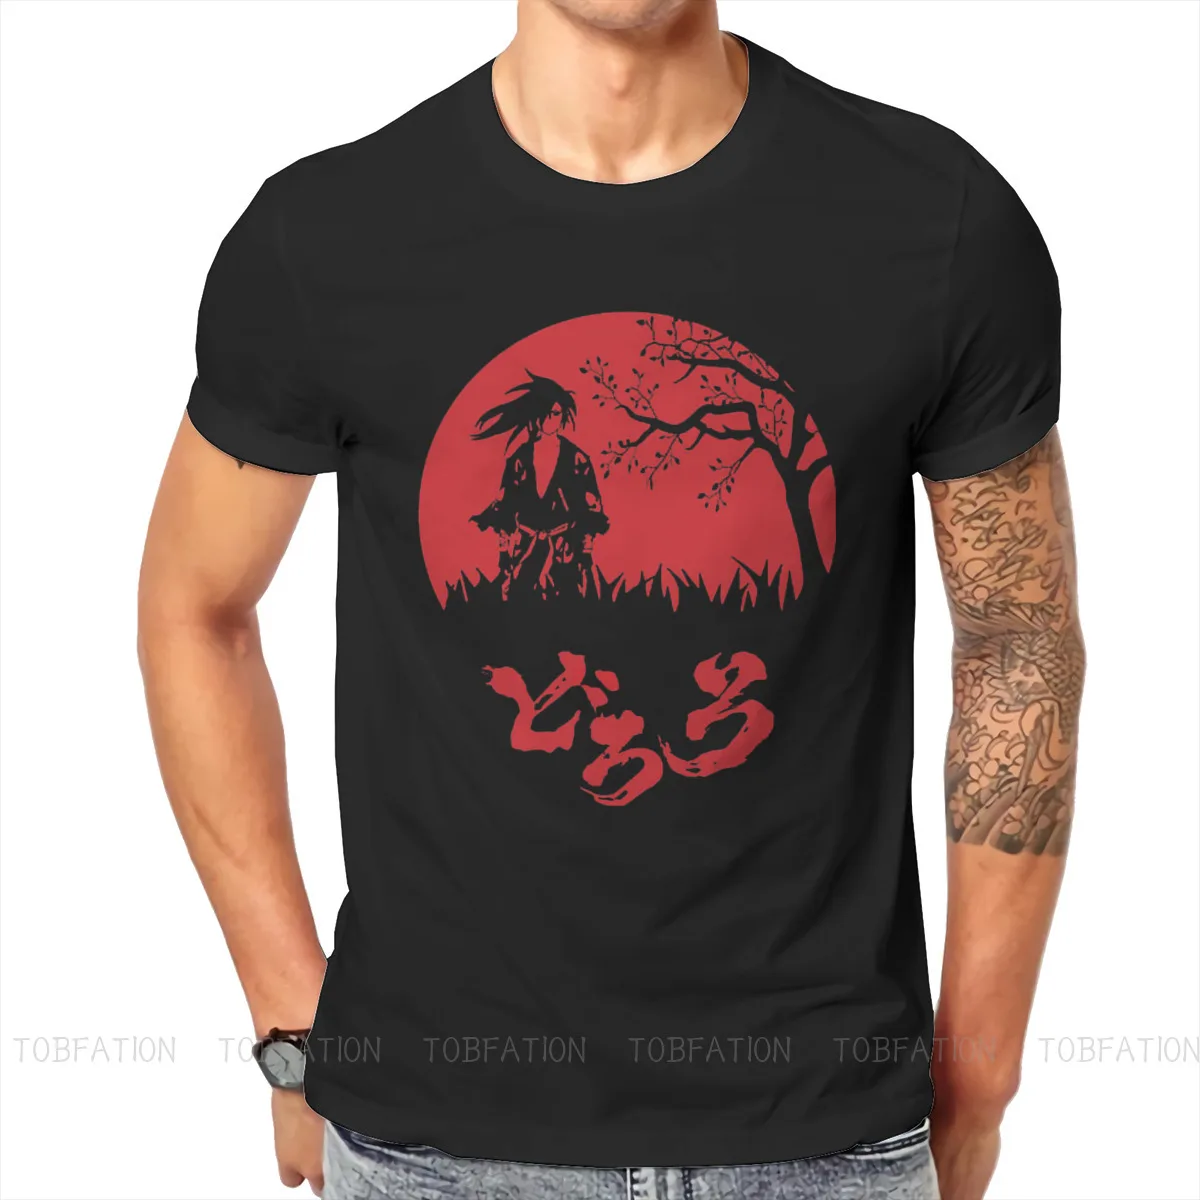 

Dororo Japanese Adventure Battle Anime Red Tshirt Classic Graphic Men's Clothing Tops Large Cotton O-Neck T Shirt